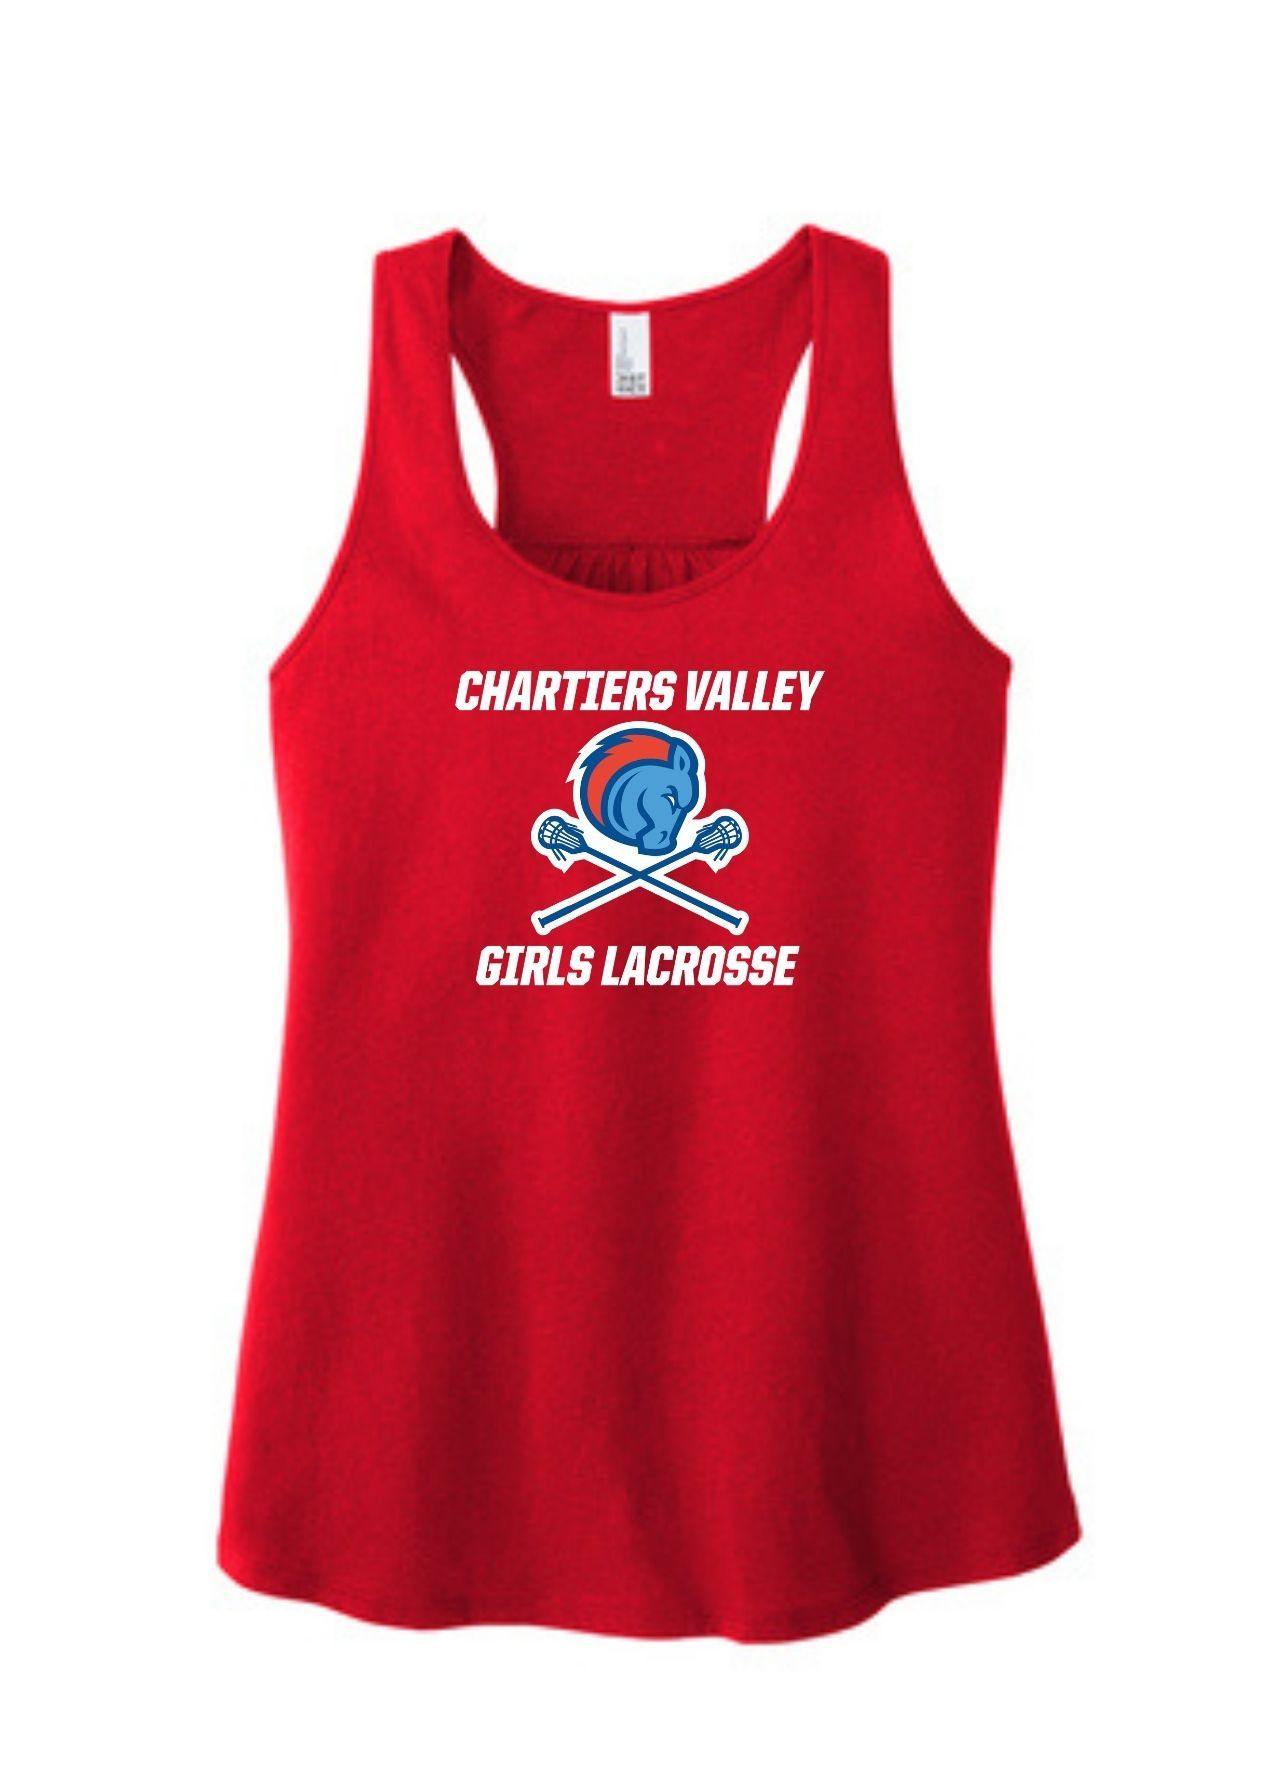 Chartiers Valley Women's Gathered Back Tank - Red